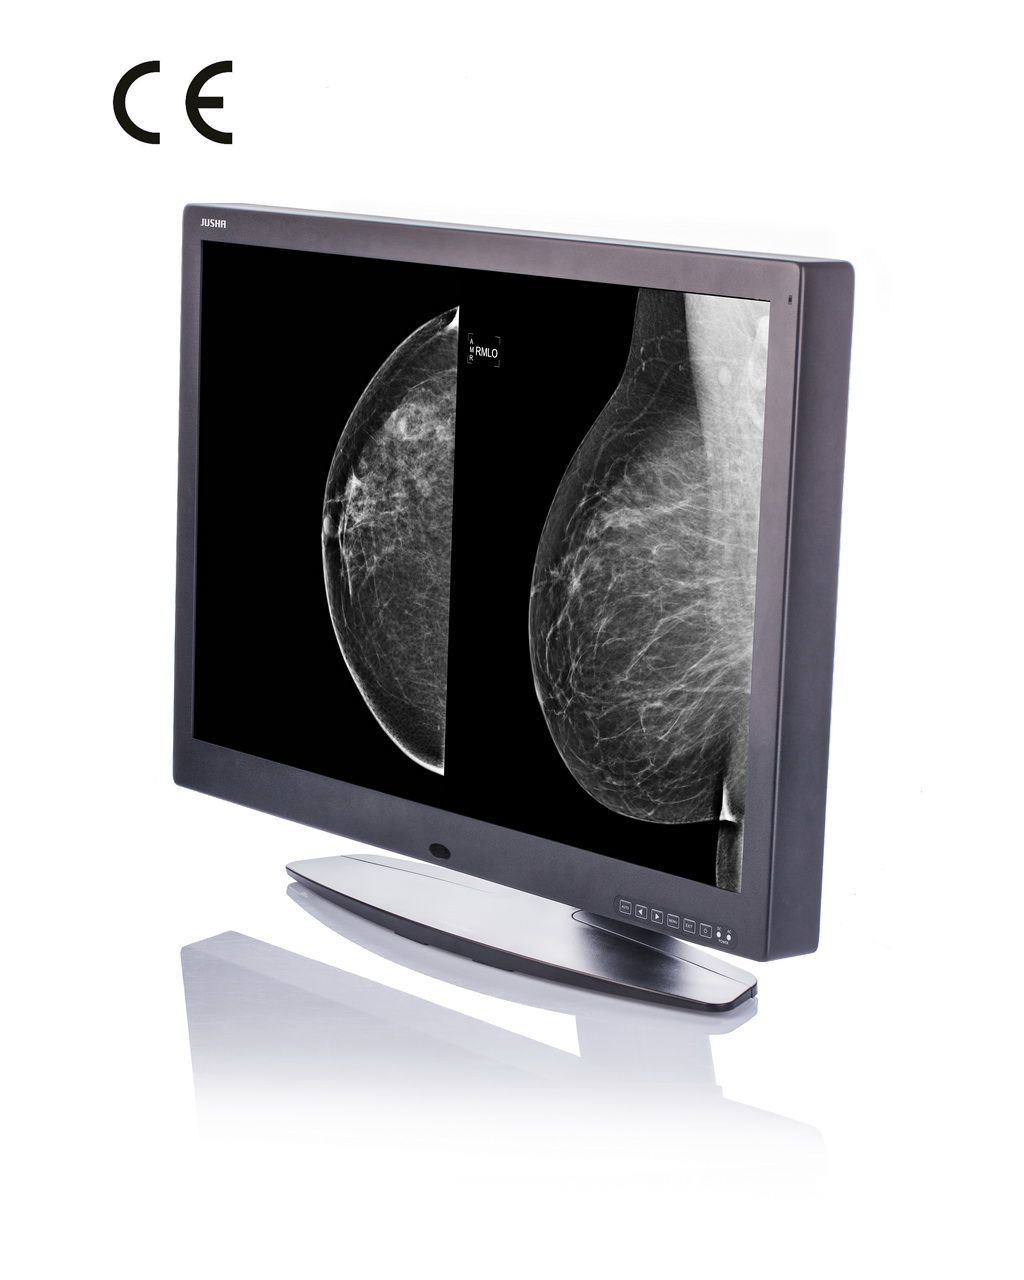 10MP 30-Inch 4096X2600 LCD Screen Monochrome Monitor, CE Approved, Veterinary X Ray Equipment